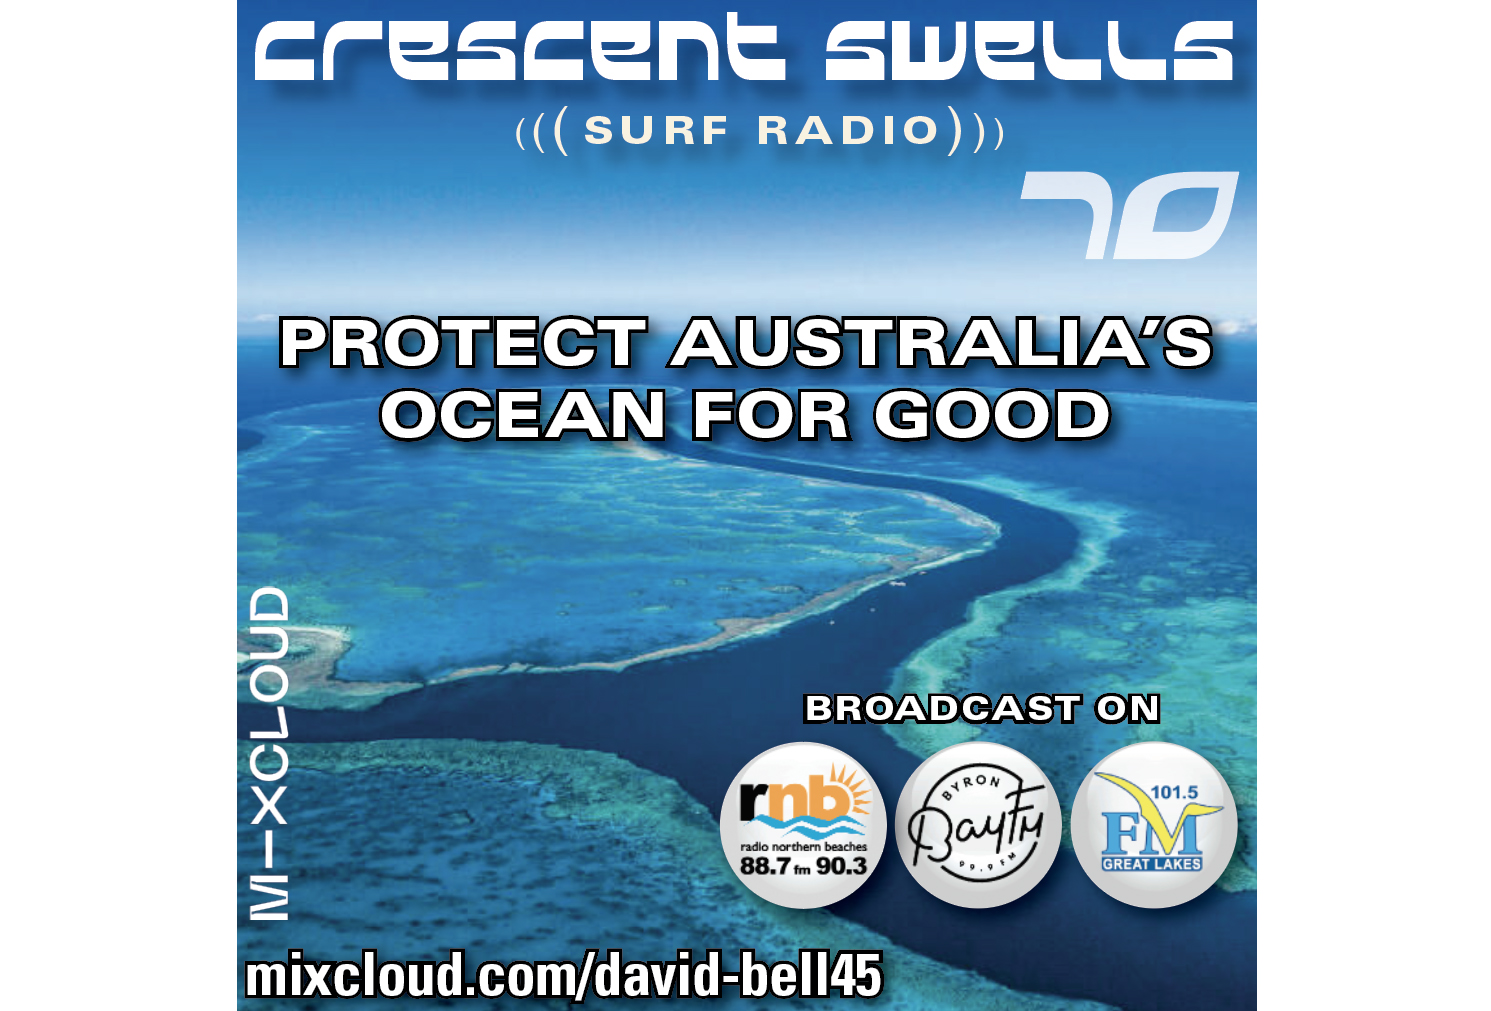 Image 1 for Surf Radio!  Crescent Swells track list, tune in  - “Protect Australia’s Oceans For Good”